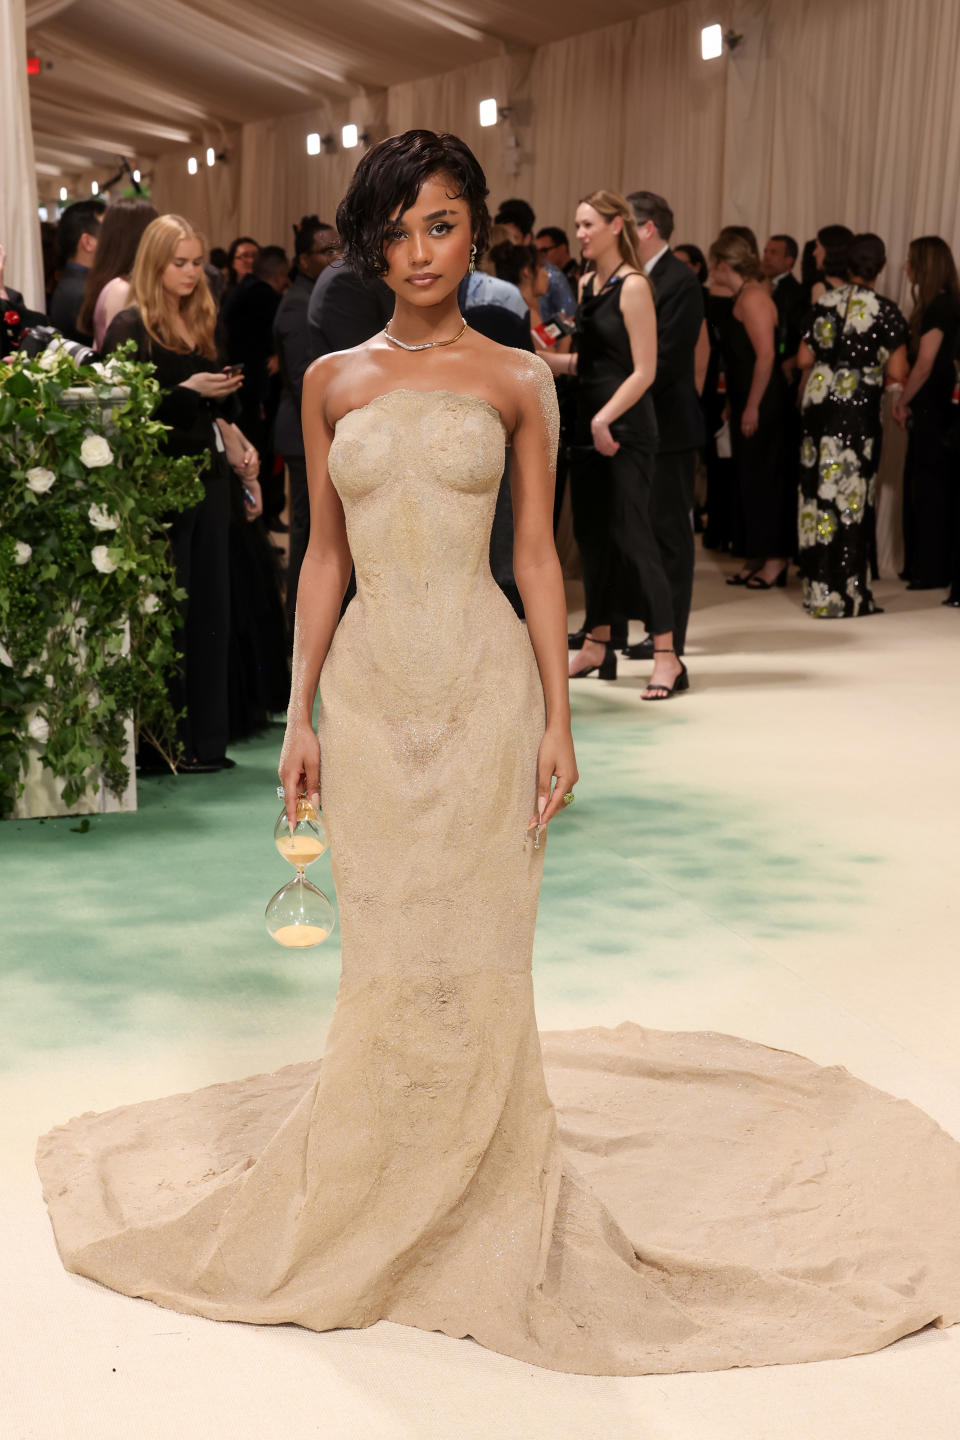 Tyla at the Met Gala in a floor-length gown that is form-fitting